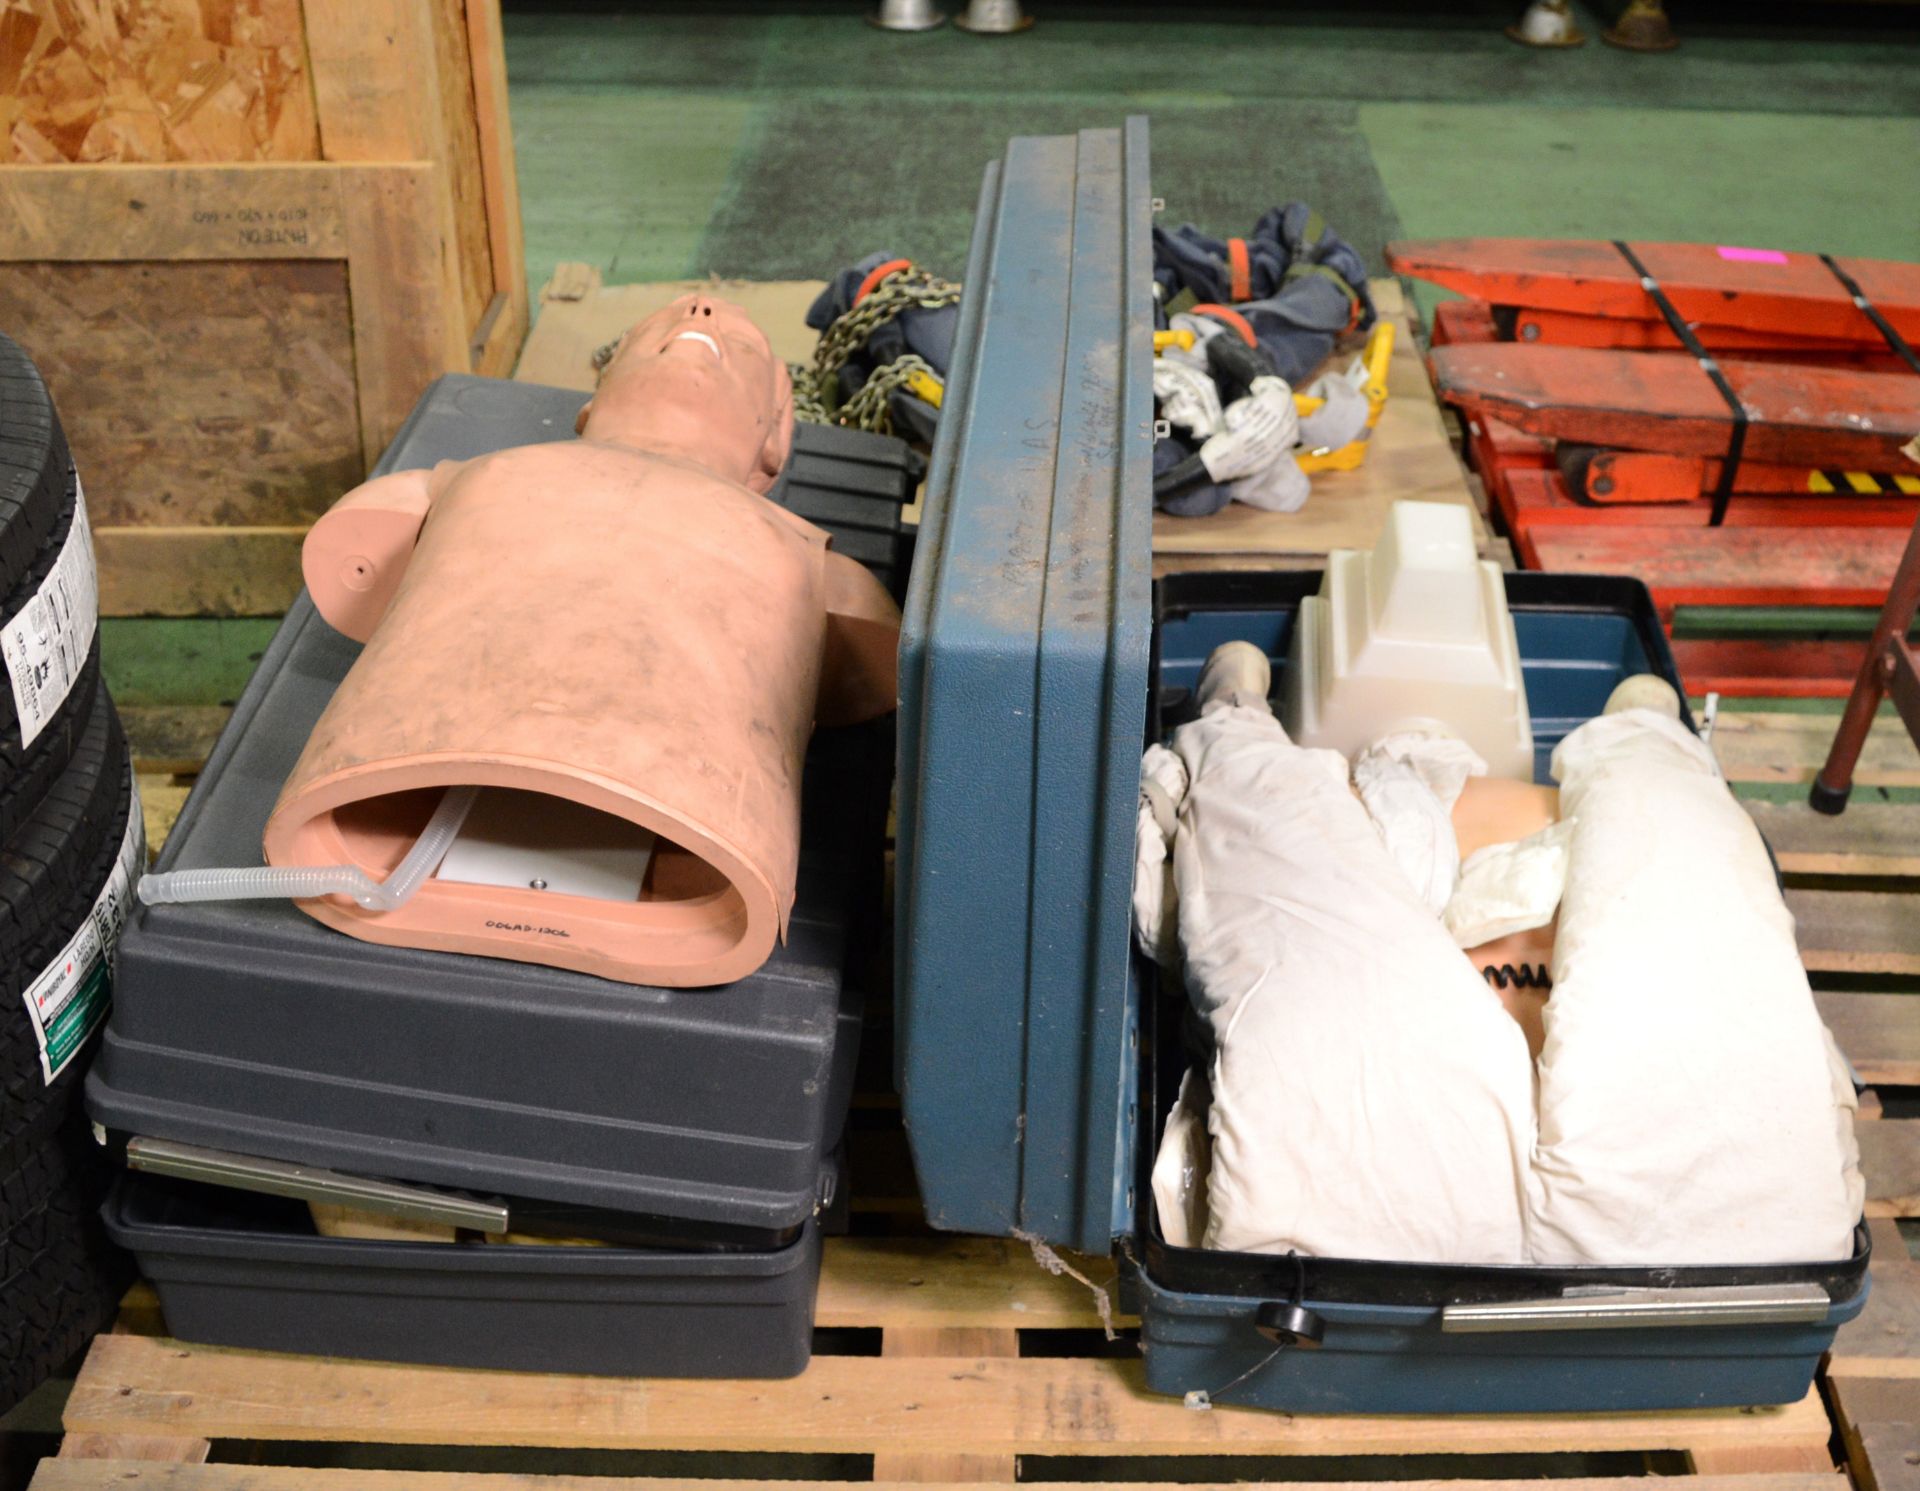 3x Resuscitation Manikins with 2x Carry Cases.